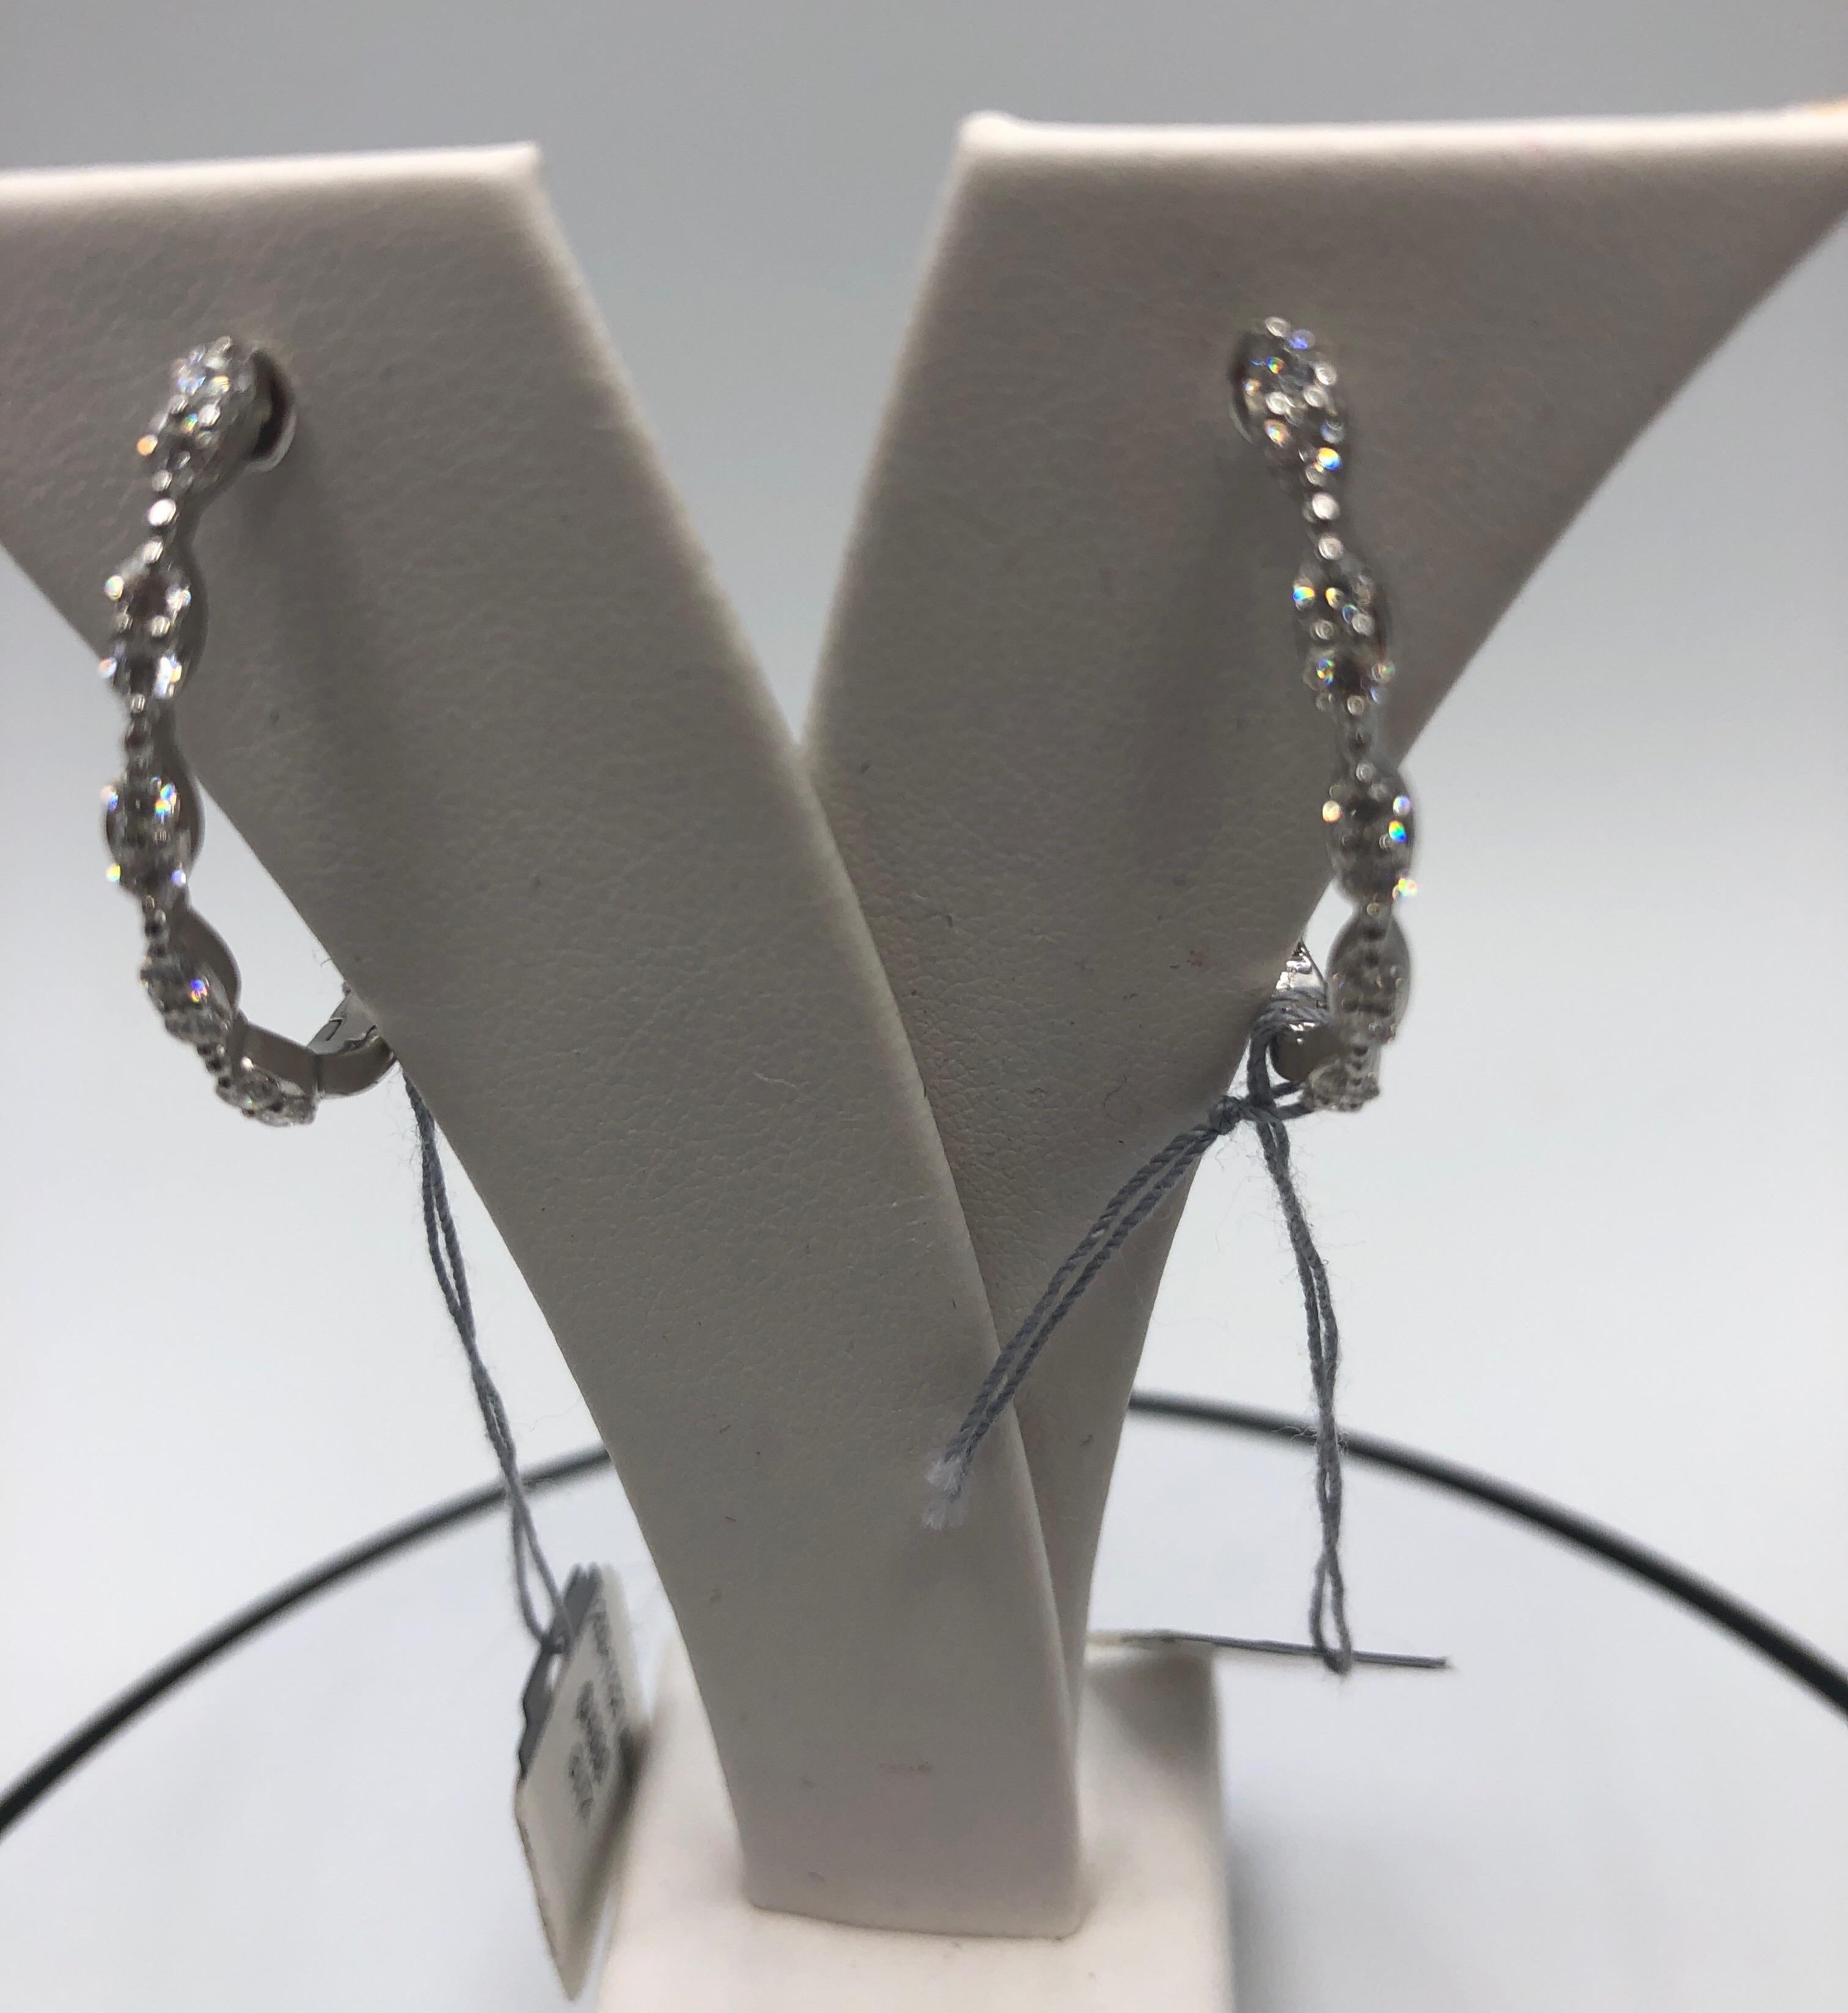 18K White Gold and Diamond Hoop Earrings made by Jye's International.  There are 32 Round Diamonds in U Shaped Hoop Design.  These stunning earrings are made by Award Winning Designer Jye's International.  